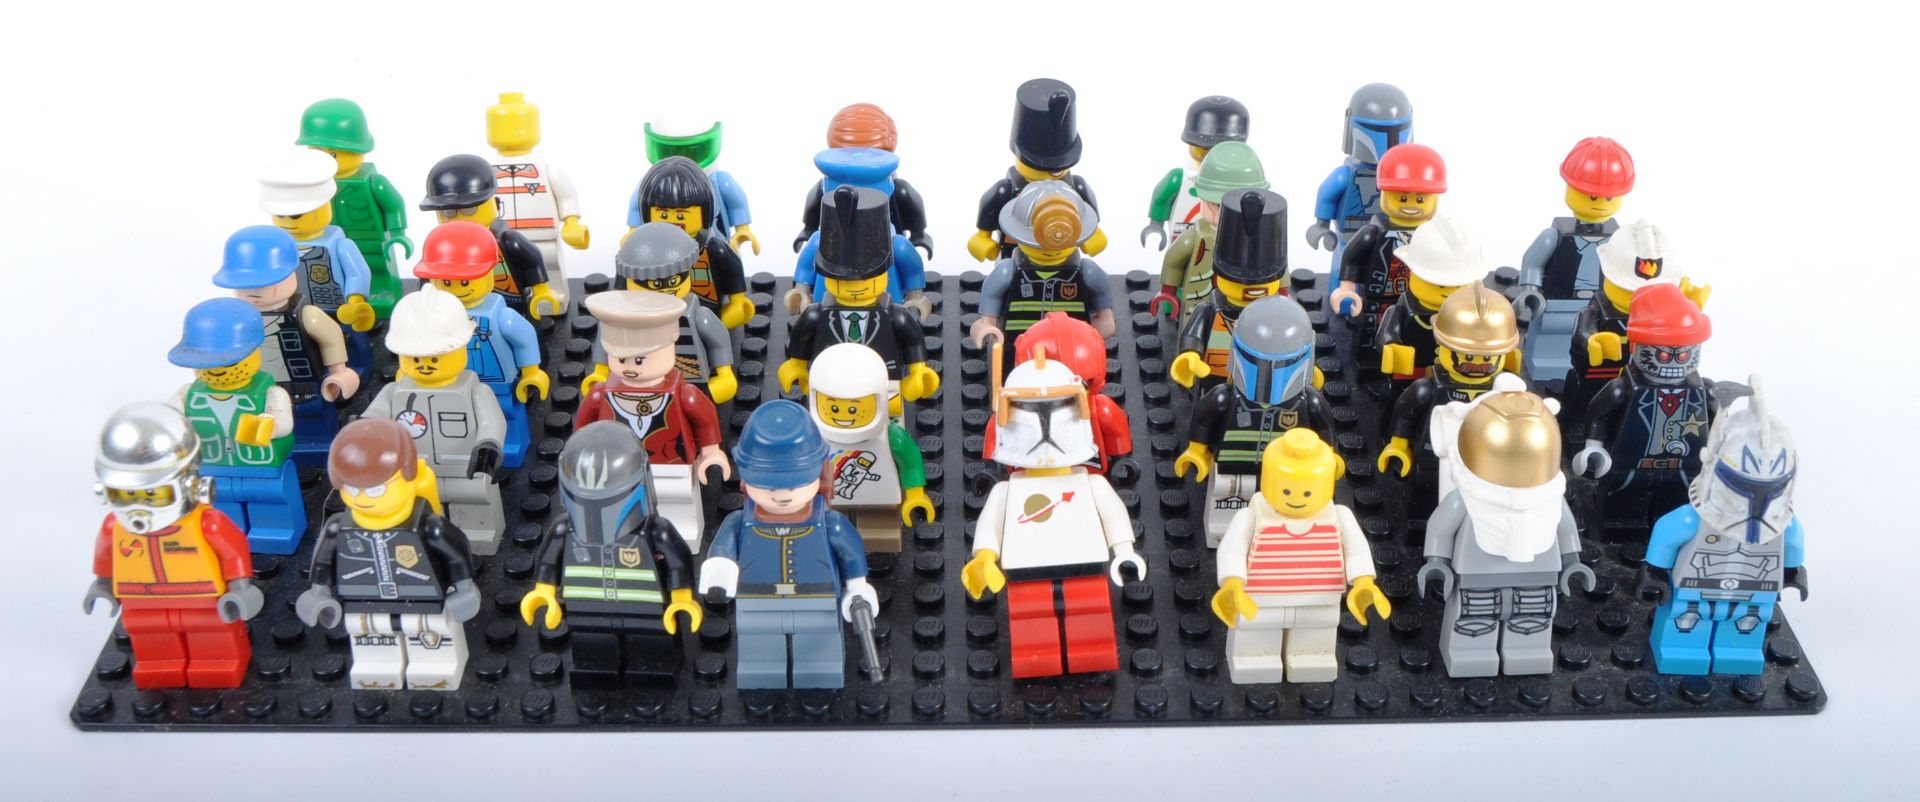 COLLECTION OF LEGO MINI FIGURES - Image 5 of 5